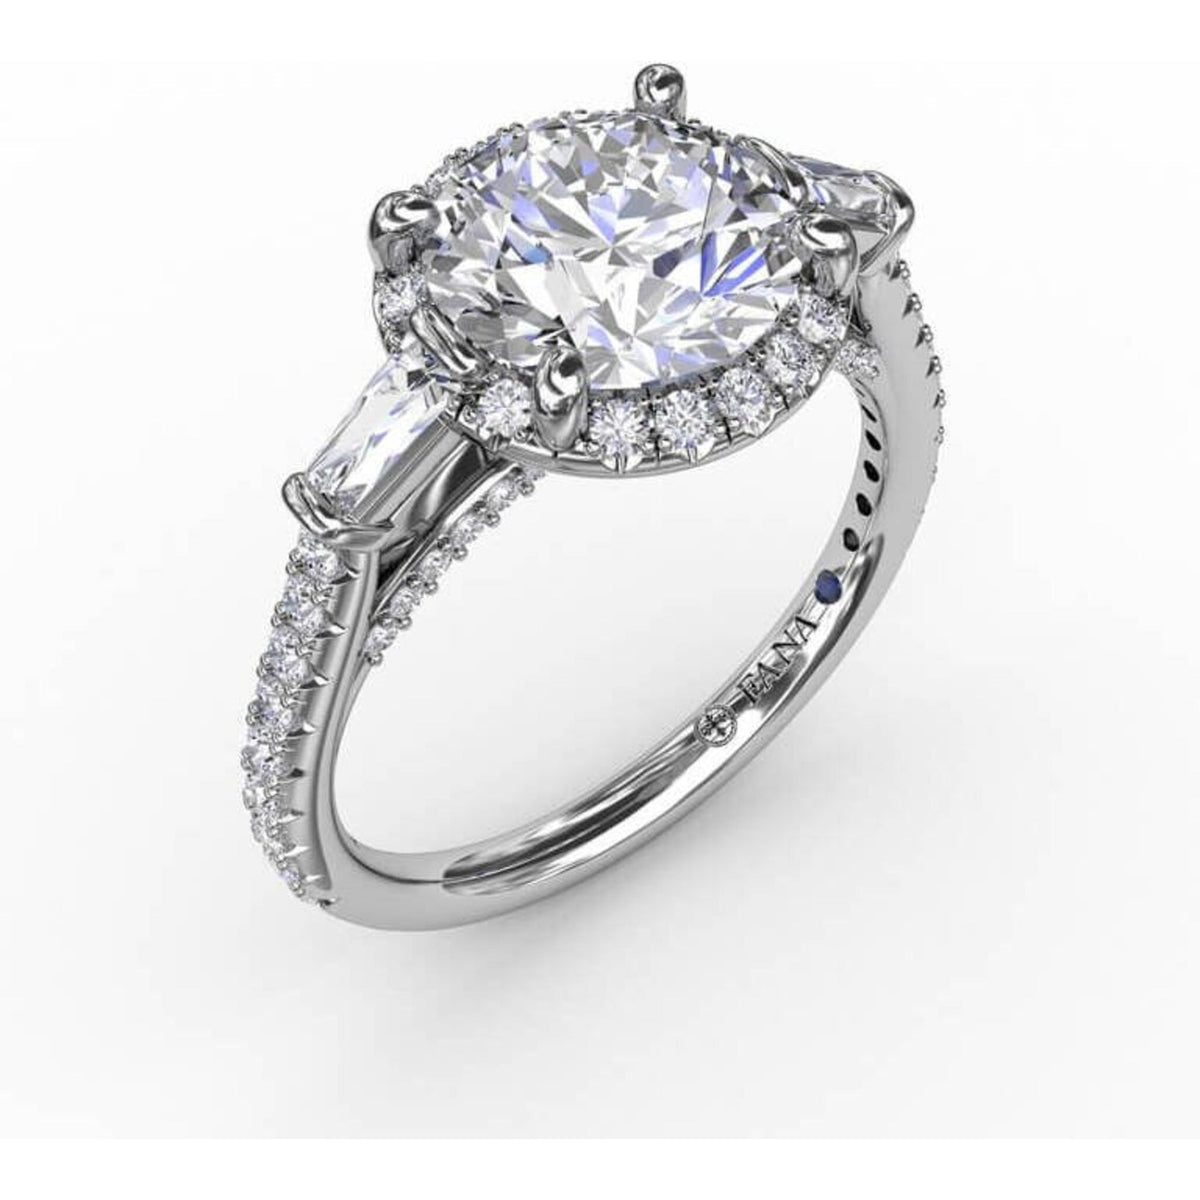 Vintage round diamond halo engagement ring with tapered baguettes